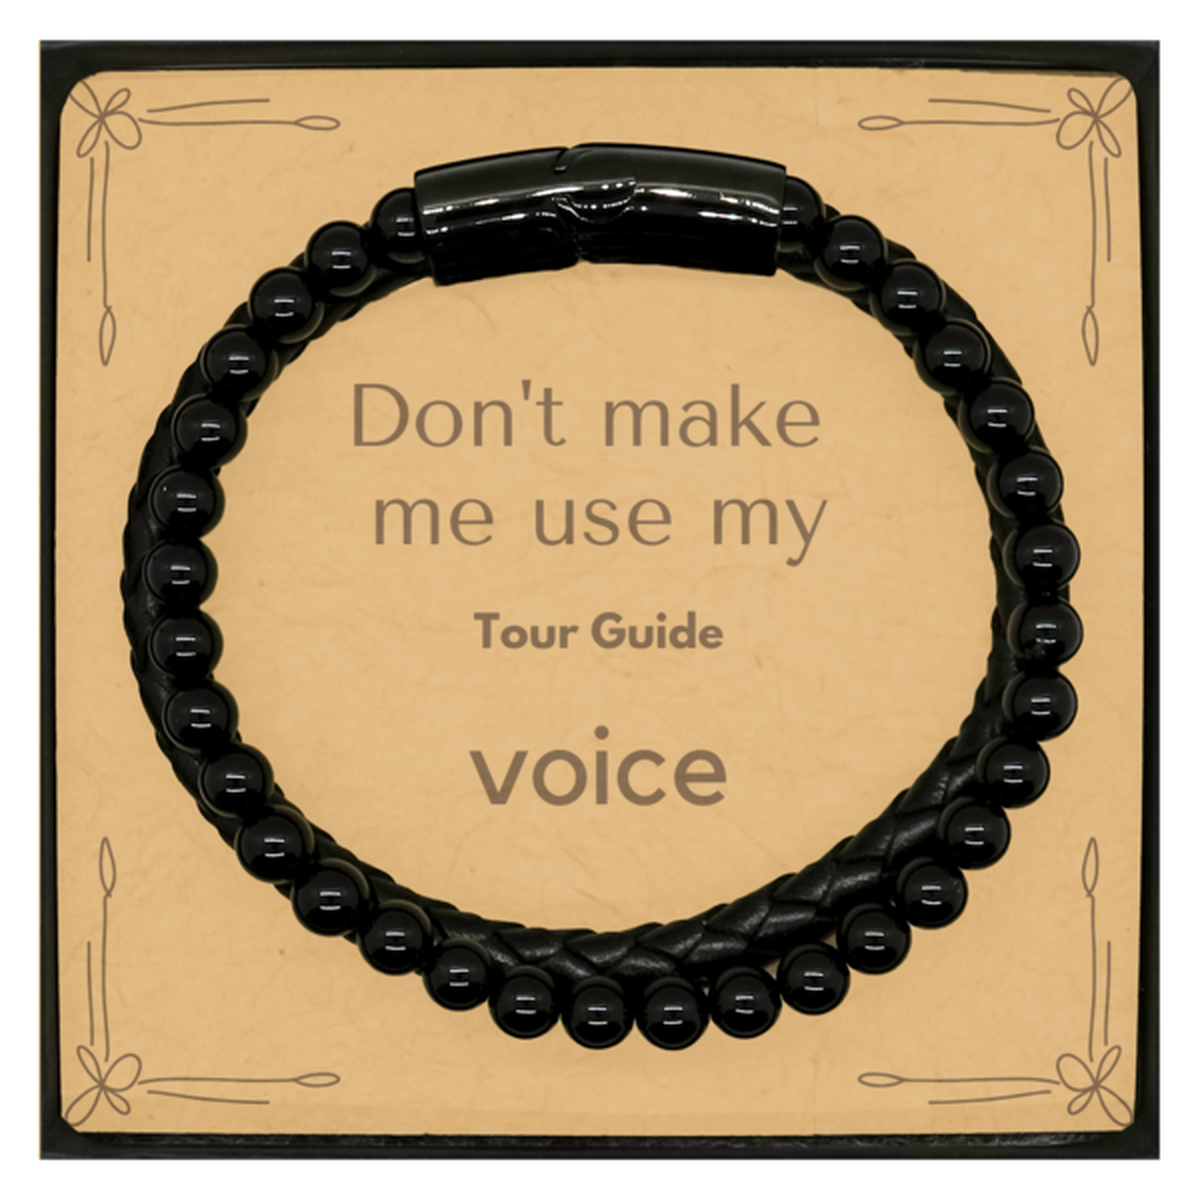 Don't make me use my Tour Guide voice, Sarcasm Tour Guide Card Gifts, Christmas Tour Guide Stone Leather Bracelets Birthday Unique Gifts For Tour Guide Coworkers, Men, Women, Colleague, Friends